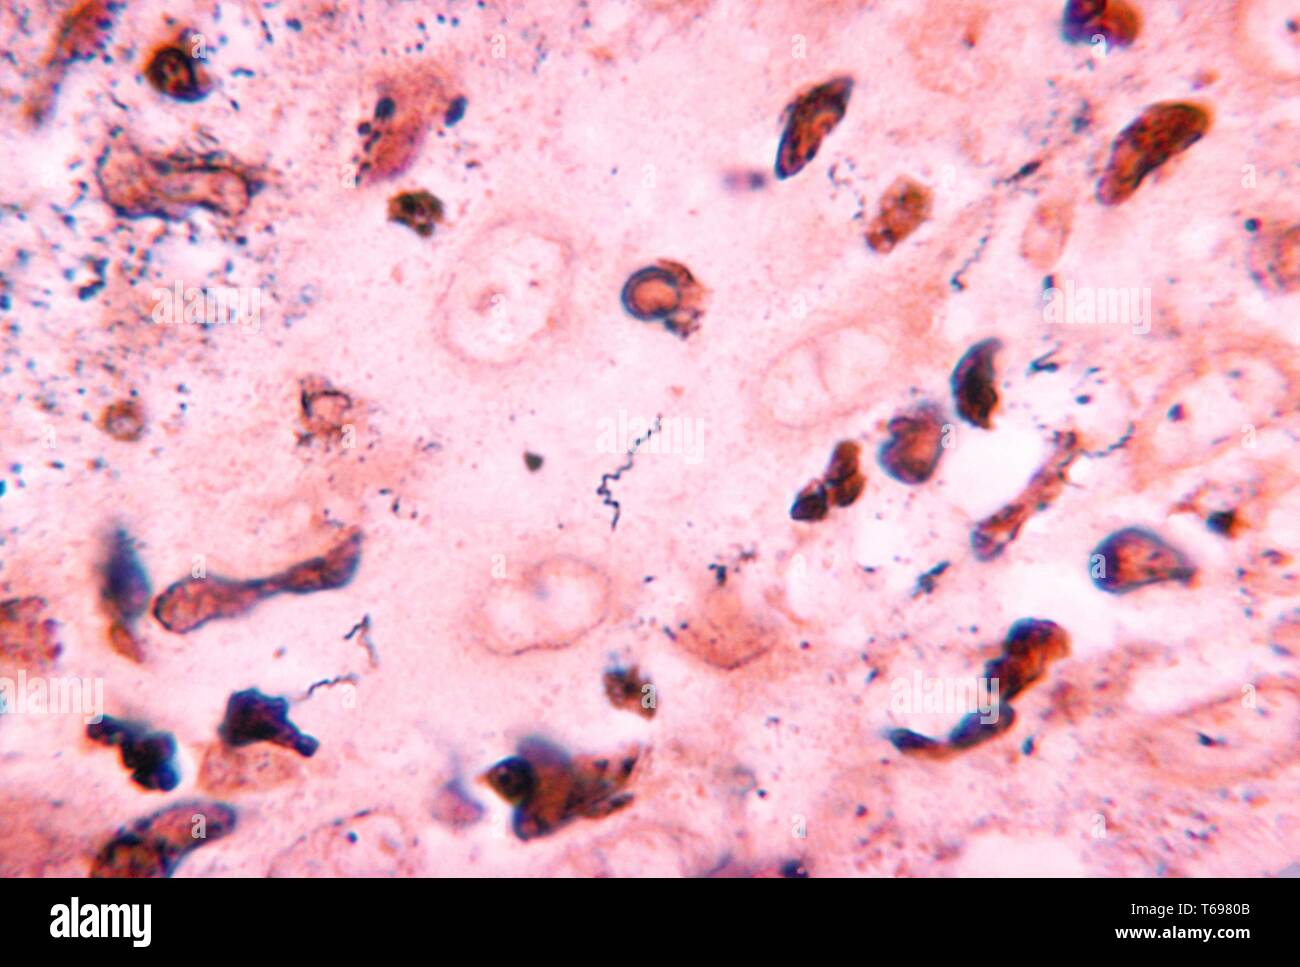 A photomicrograph revealing Treponema carateum bacteria obtained from a chimpanzee using Krajain's stain, 1970. Pinta is caused by Treponema carateum. This disease occurs only in tropical Central and South America. It is characterized by a painless papule (primary) followed 2 - 18 months later by secondary papules on the hands, feet and scalp. Image courtesy CDC. Stock Photo